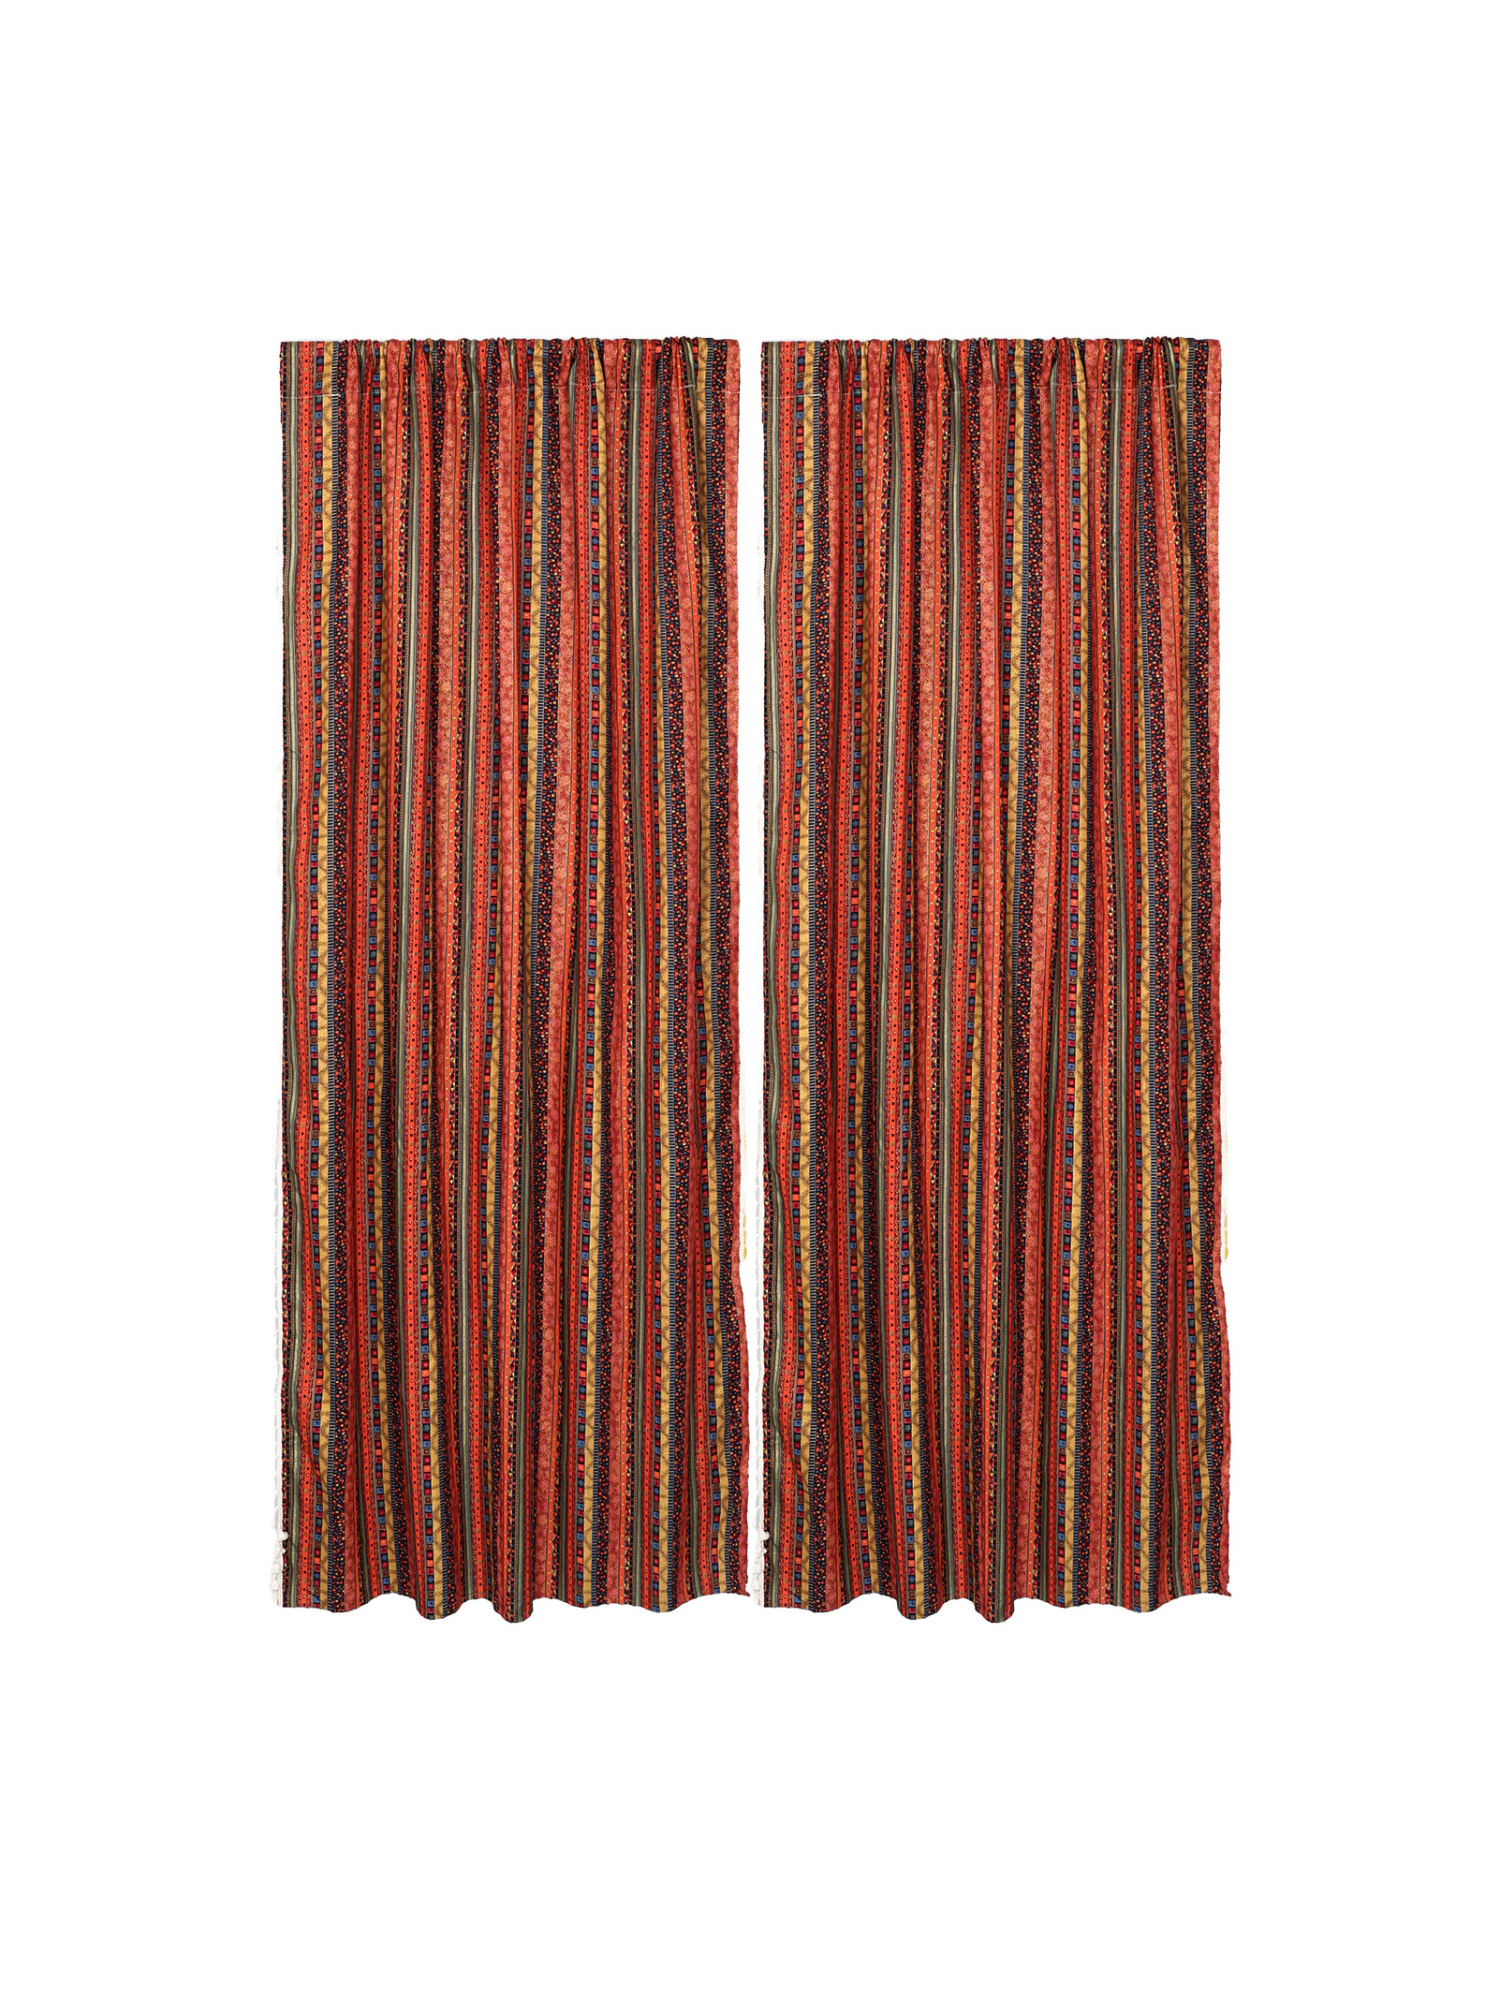 ZHH 52 x 63 Inch 2 Panels Colorful Striped Bohemian Curtains for Bathroom, Kitchen, Living Room, Bedroom